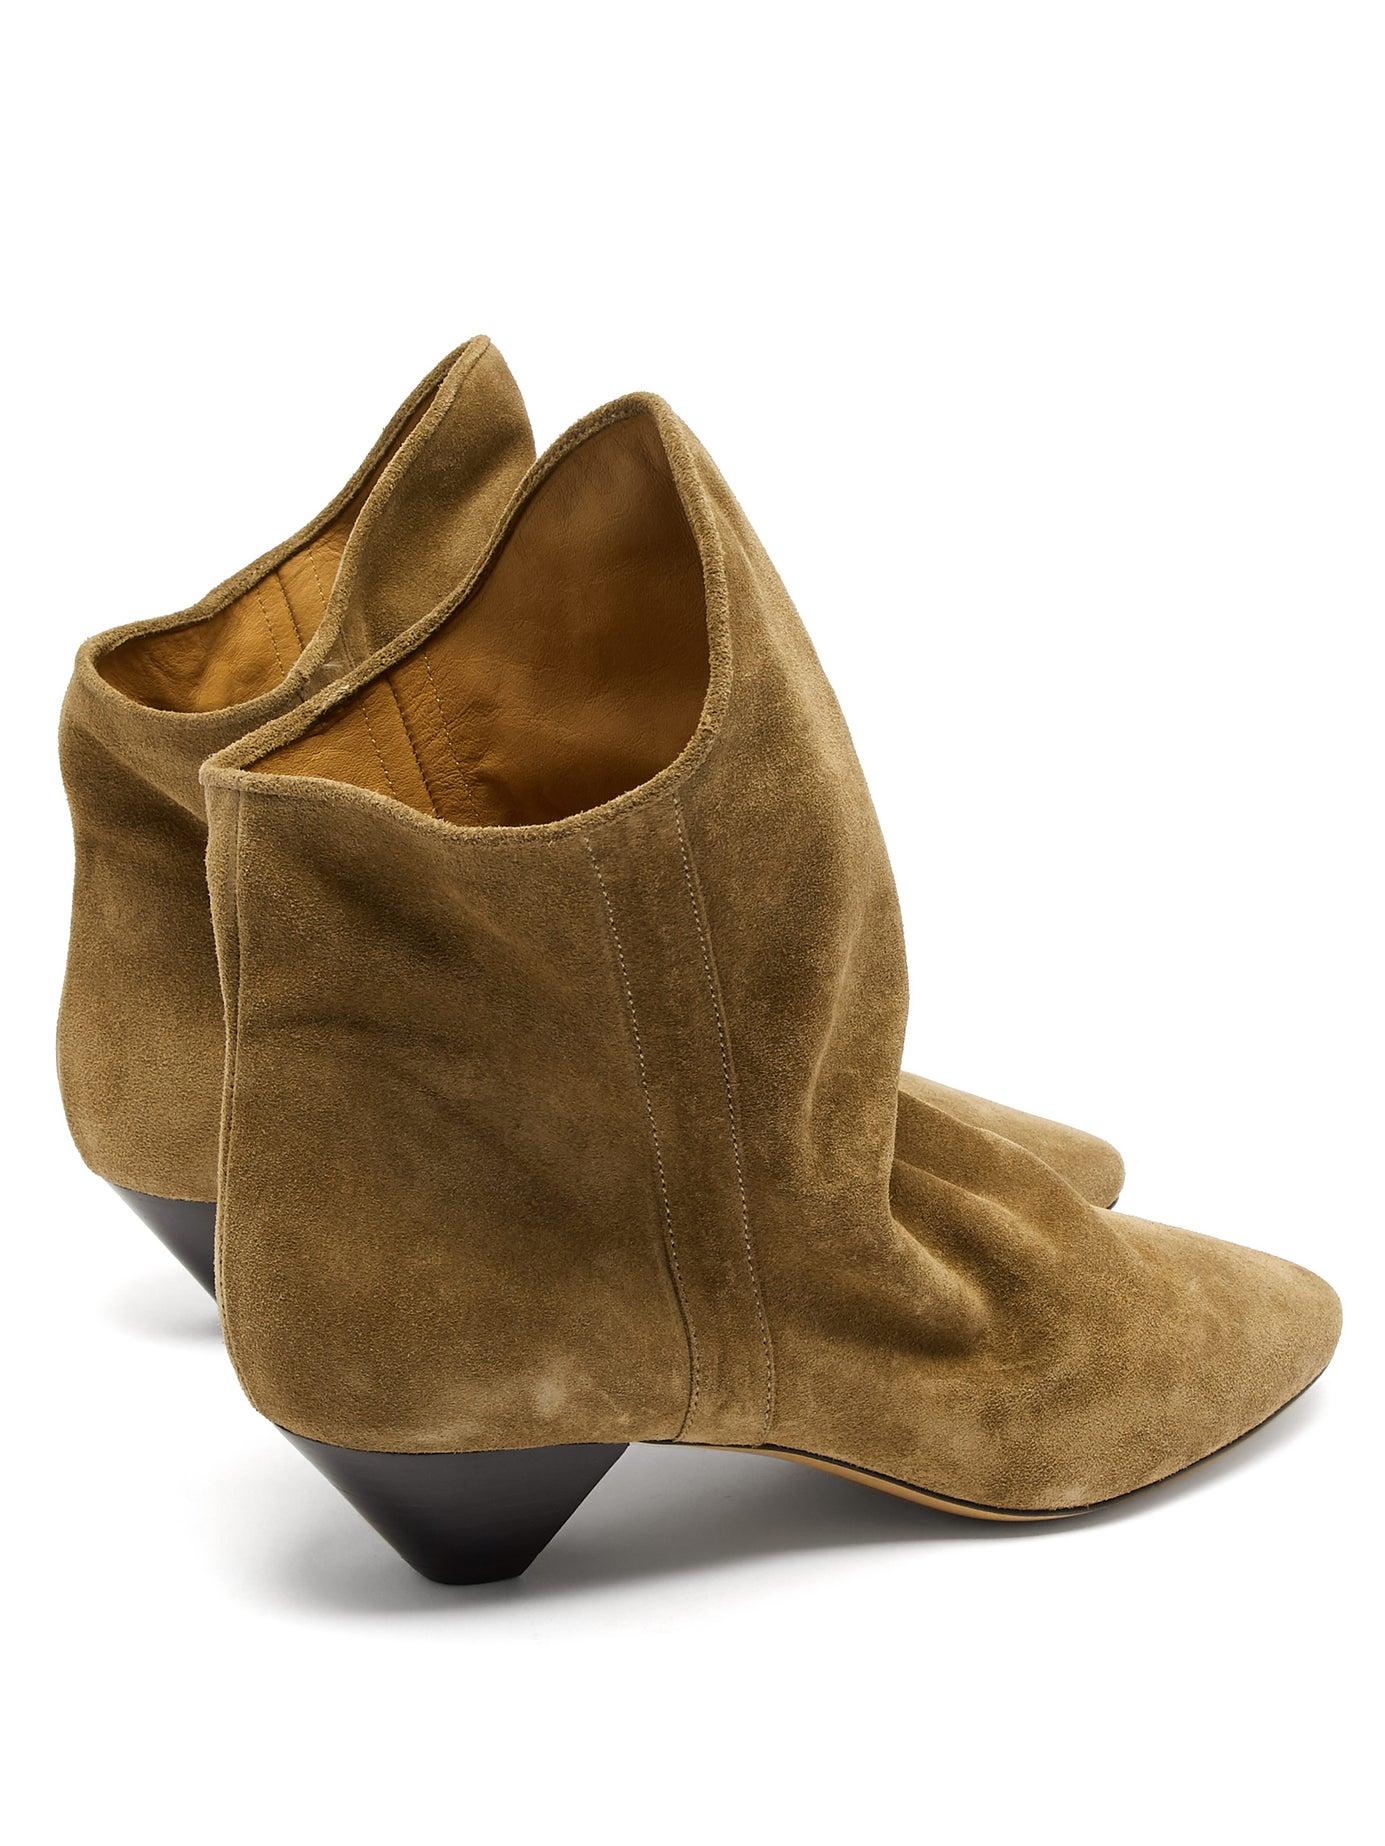 Isabel Marant Doey Suede Ankle Boots | Lyst